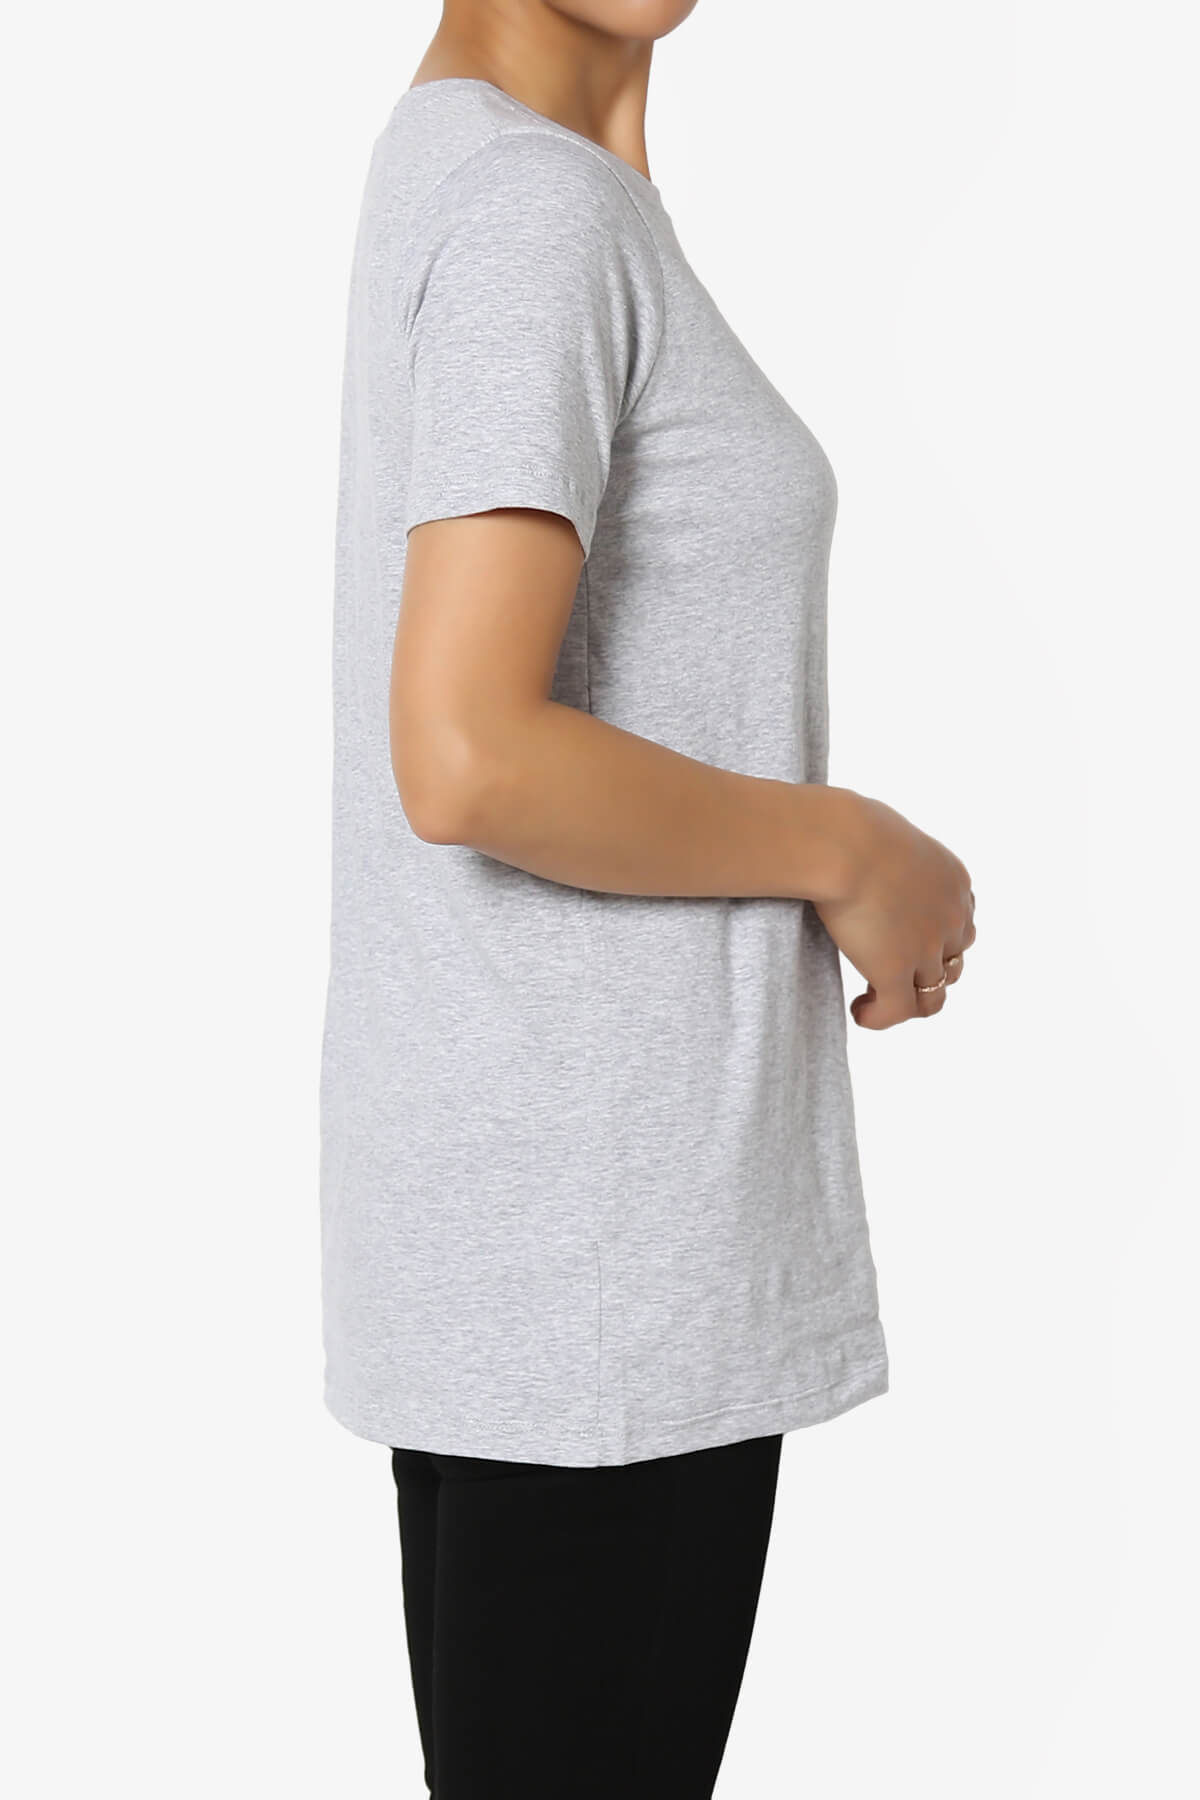 Load image into Gallery viewer, Elora Crew Neck Short Sleeve T-Shirt HEATHER GREY_4
